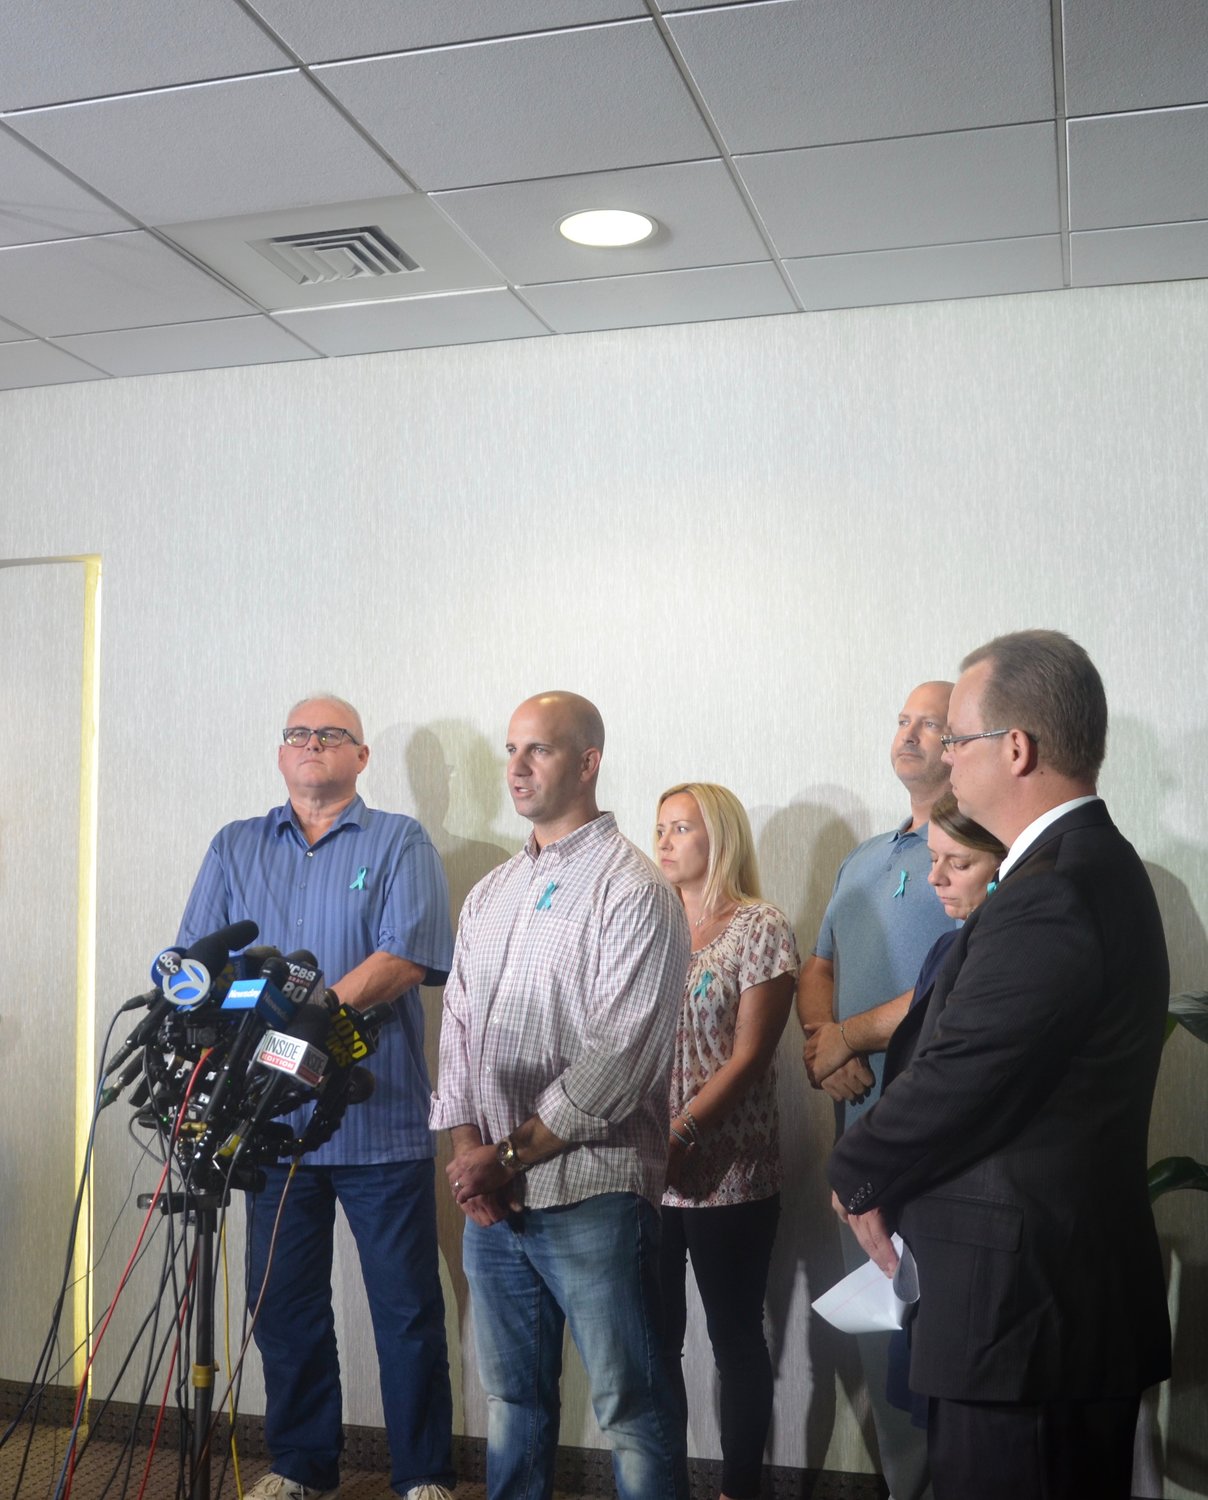 Gabby Petito's stepfather James Schmidt speaks at a press conference on Sept. 28.